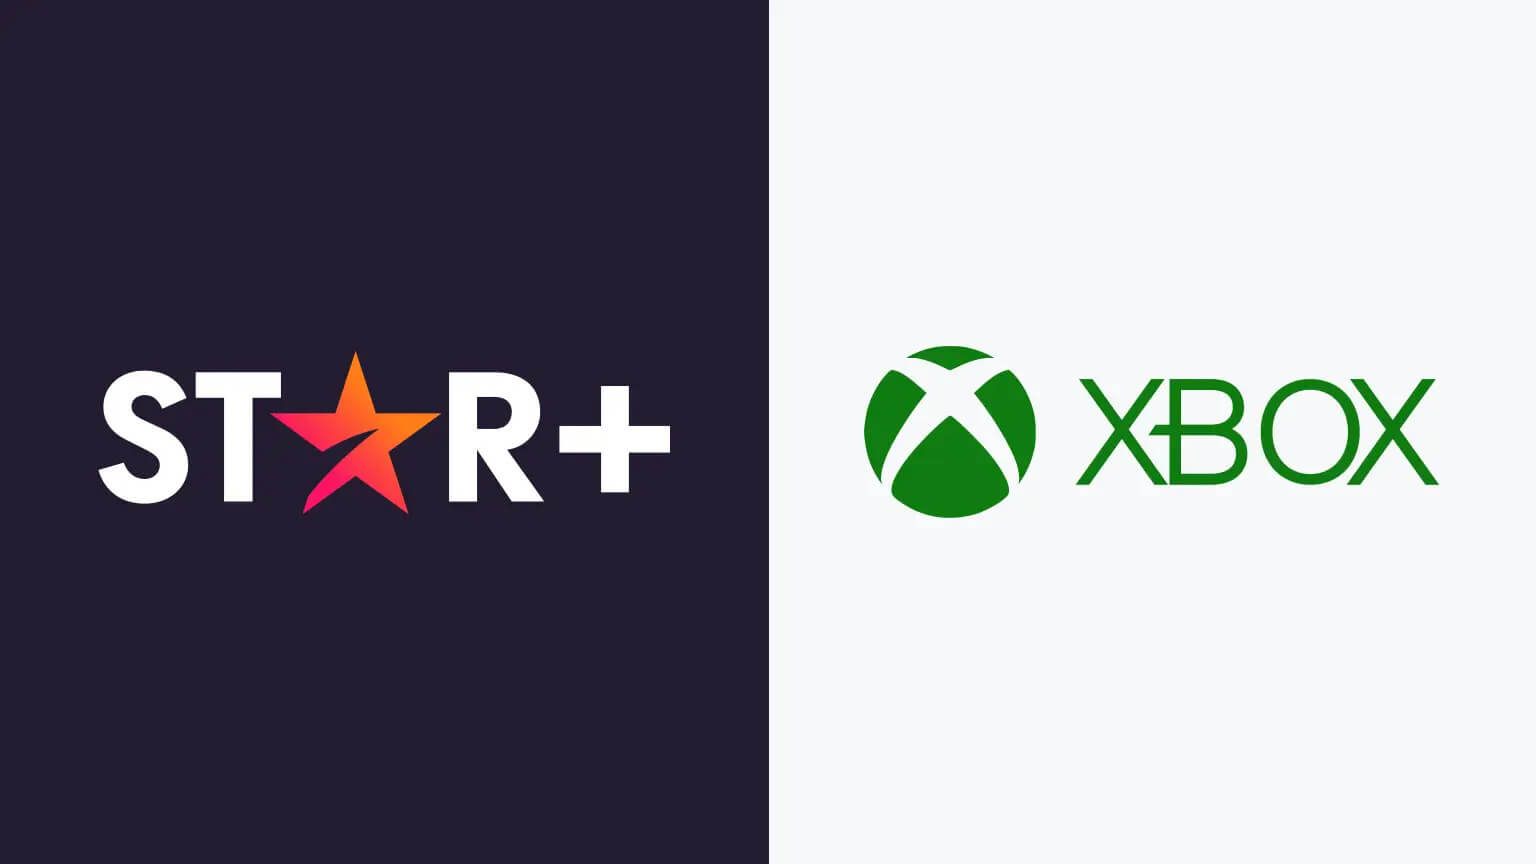 install and activate star plus on xbox